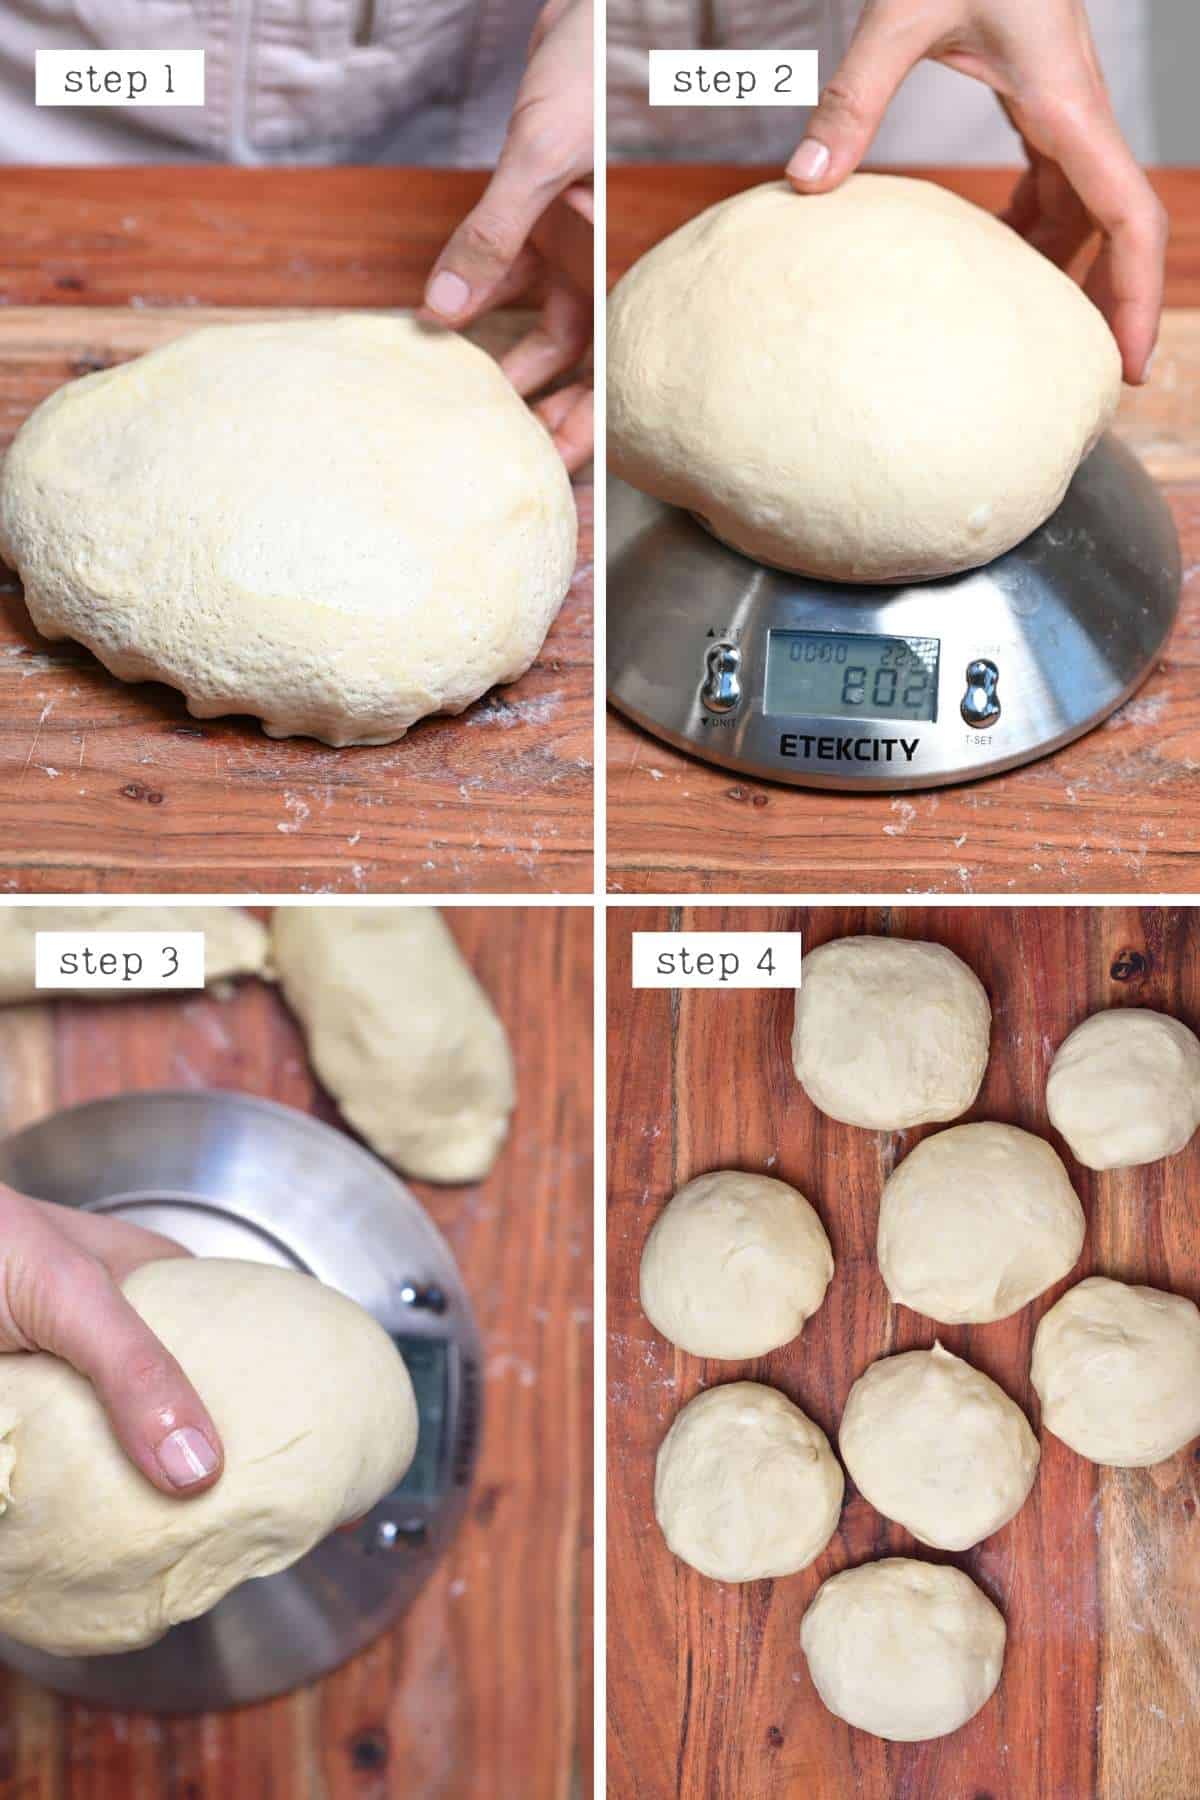 Steps for weighing and cutting pretzel dough